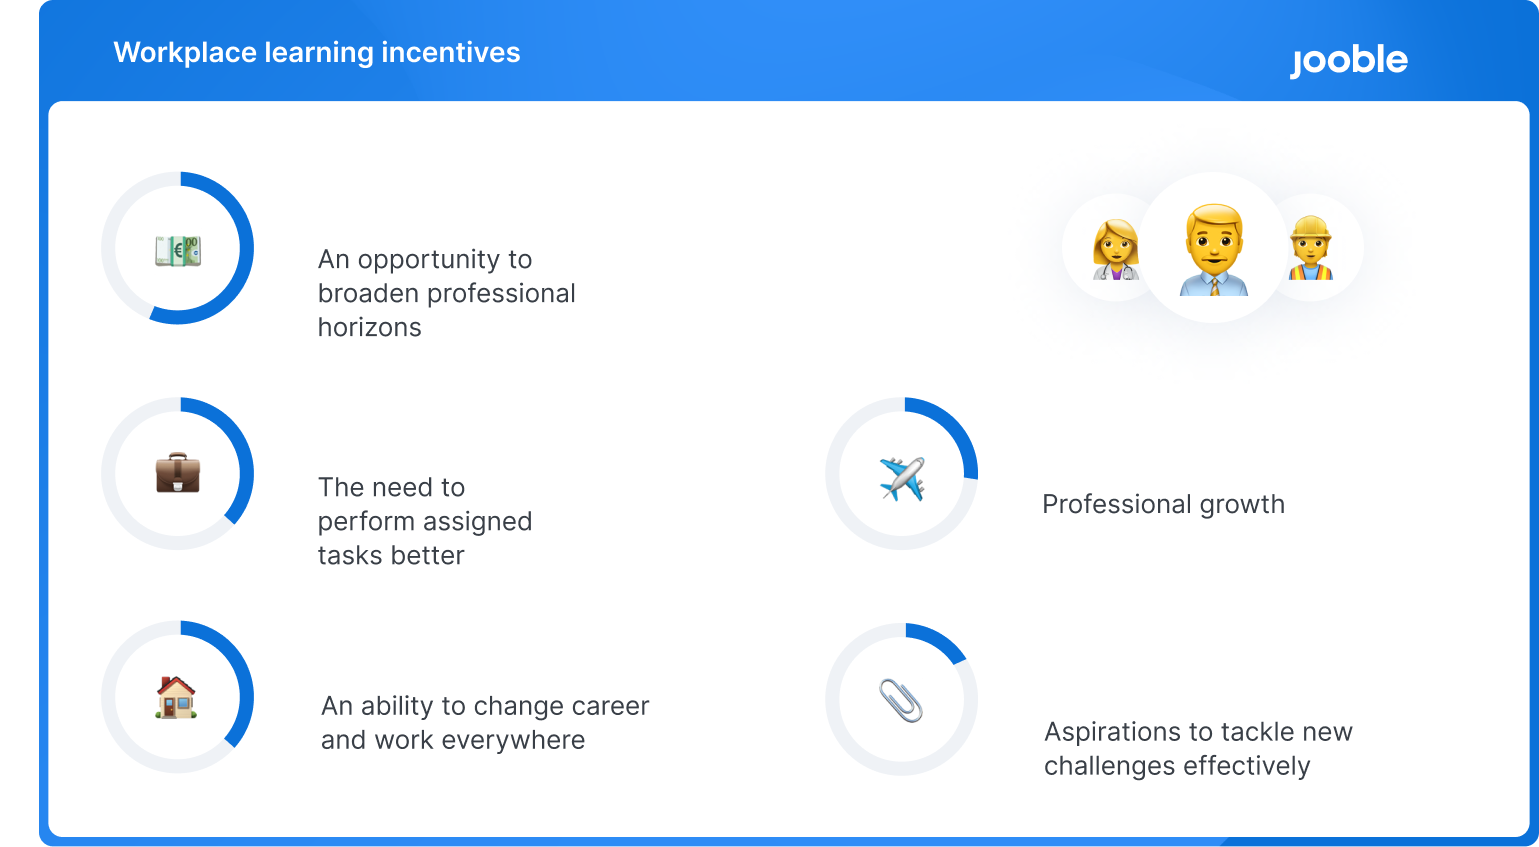 Workplace learning incentives